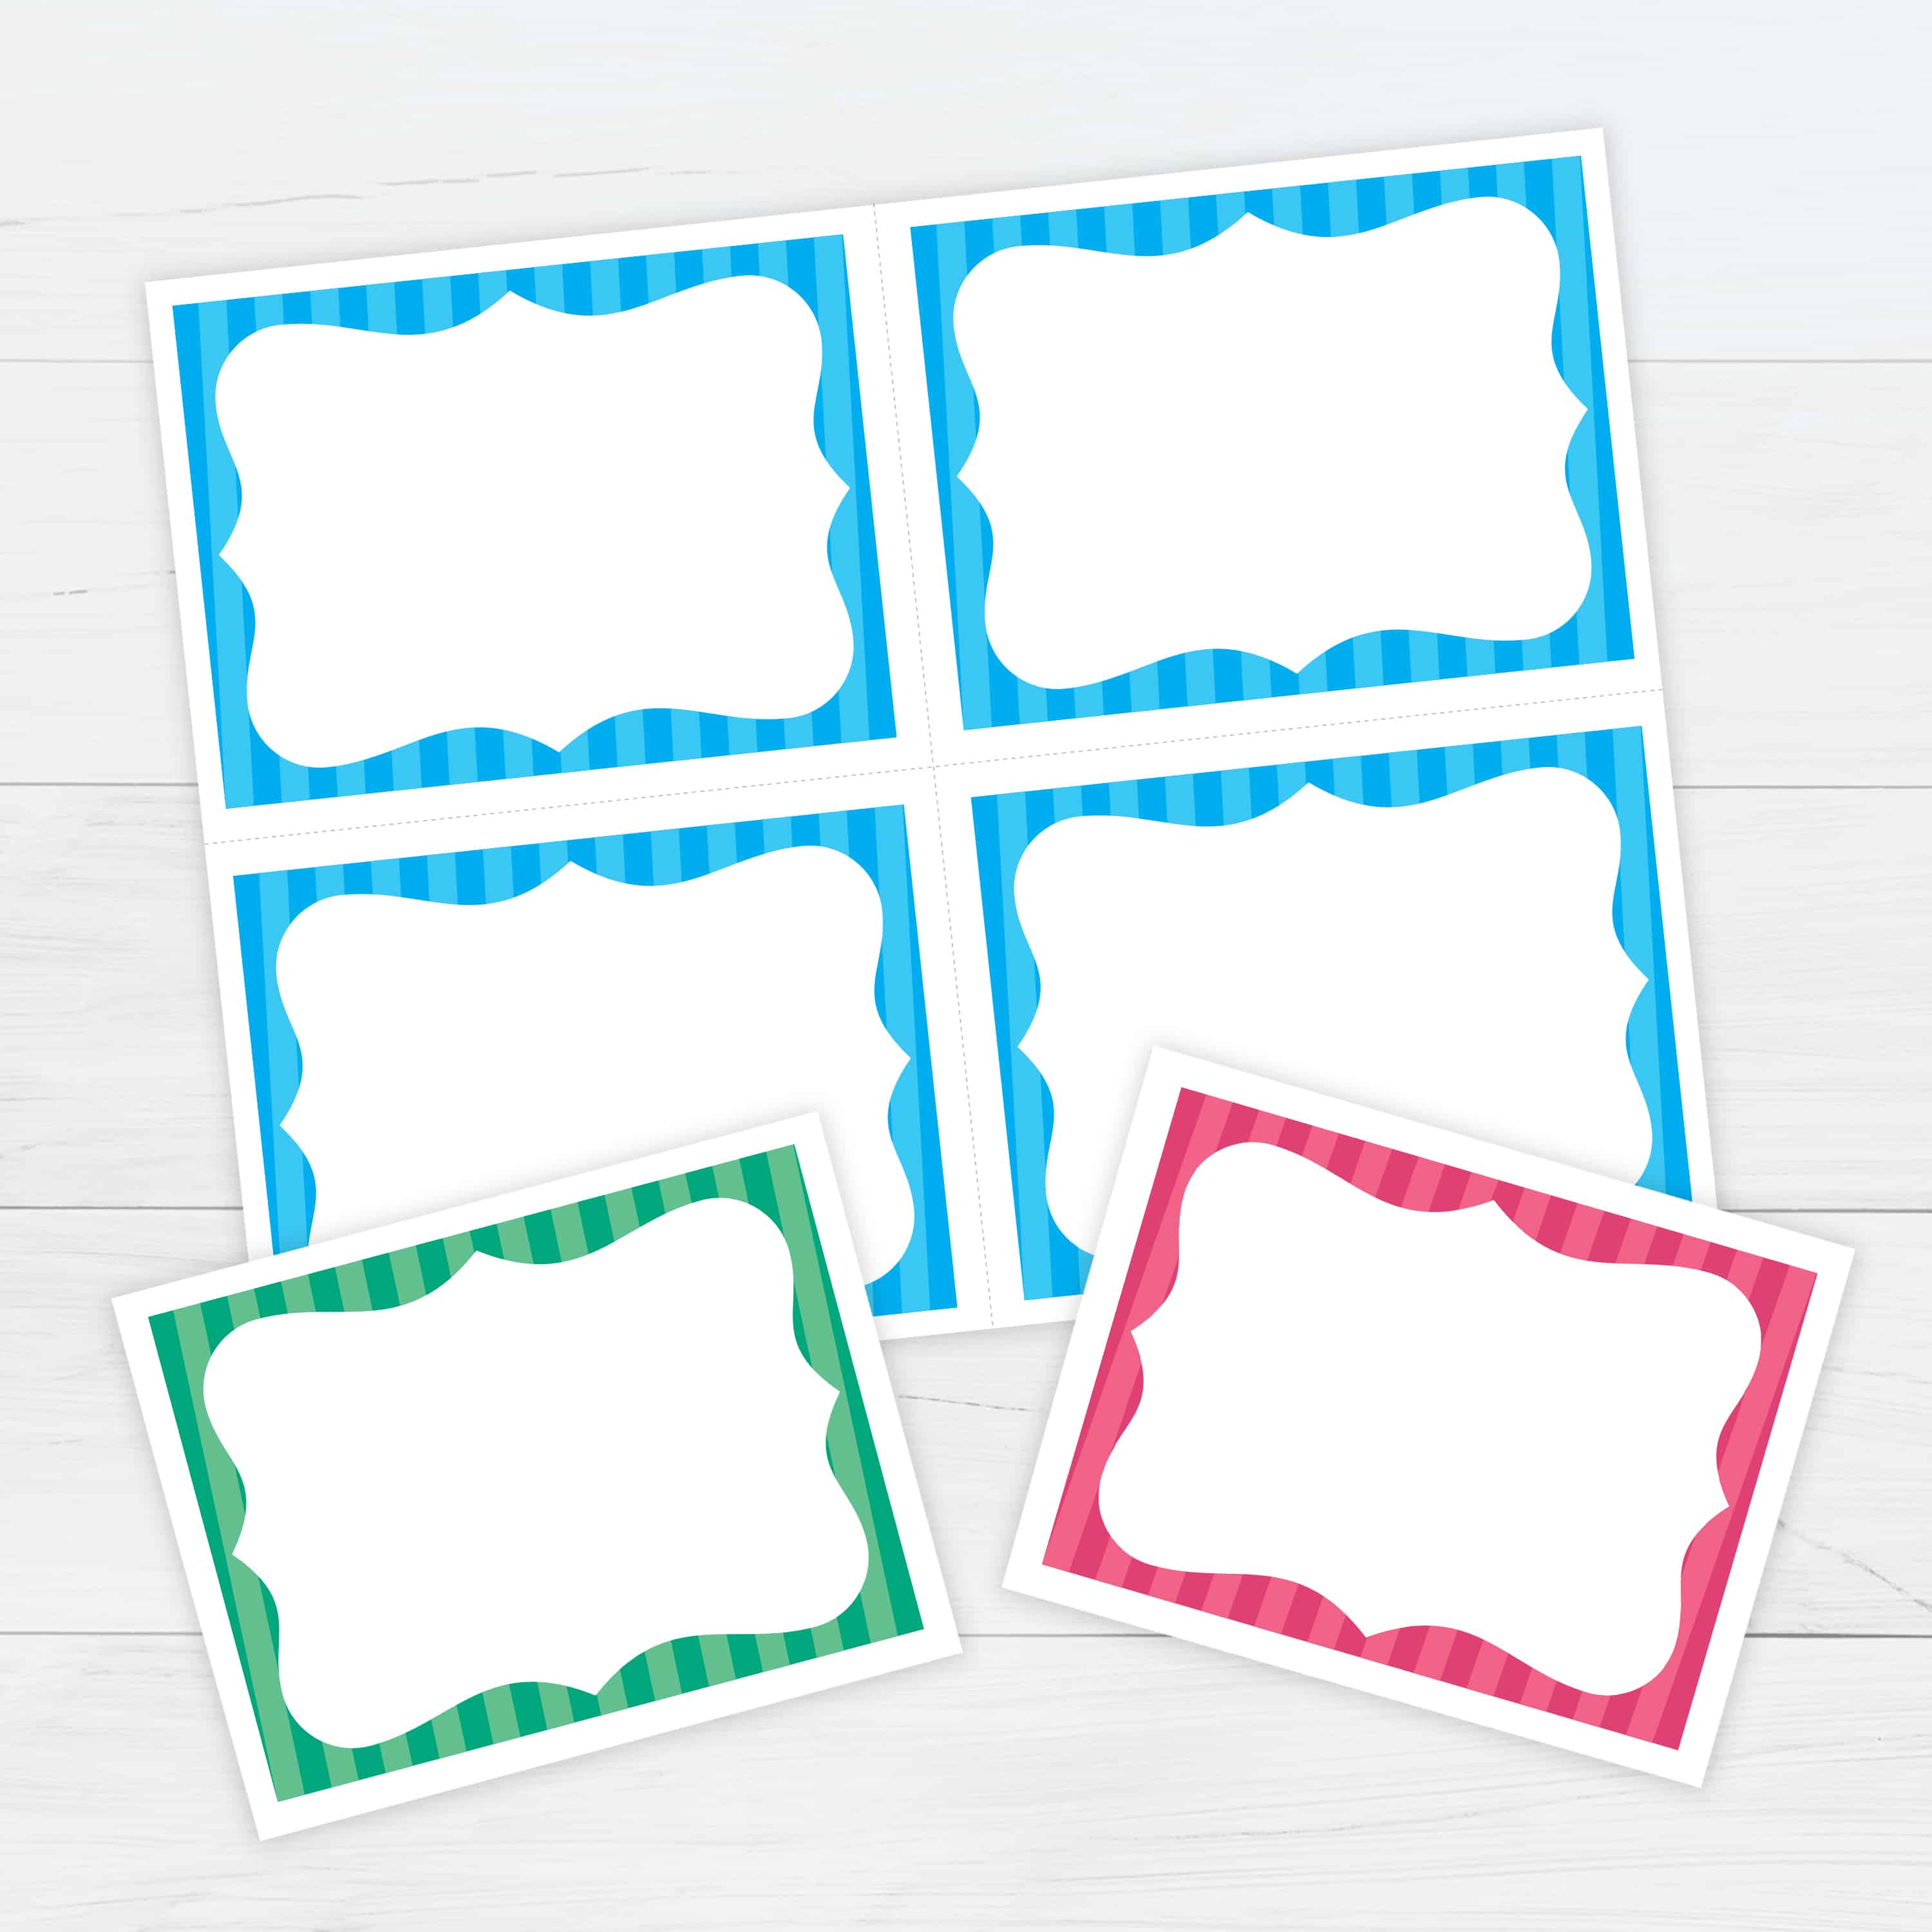 Bordered Flash cards Template 21 - Free Printable Download Within Free Printable Flash Cards Template